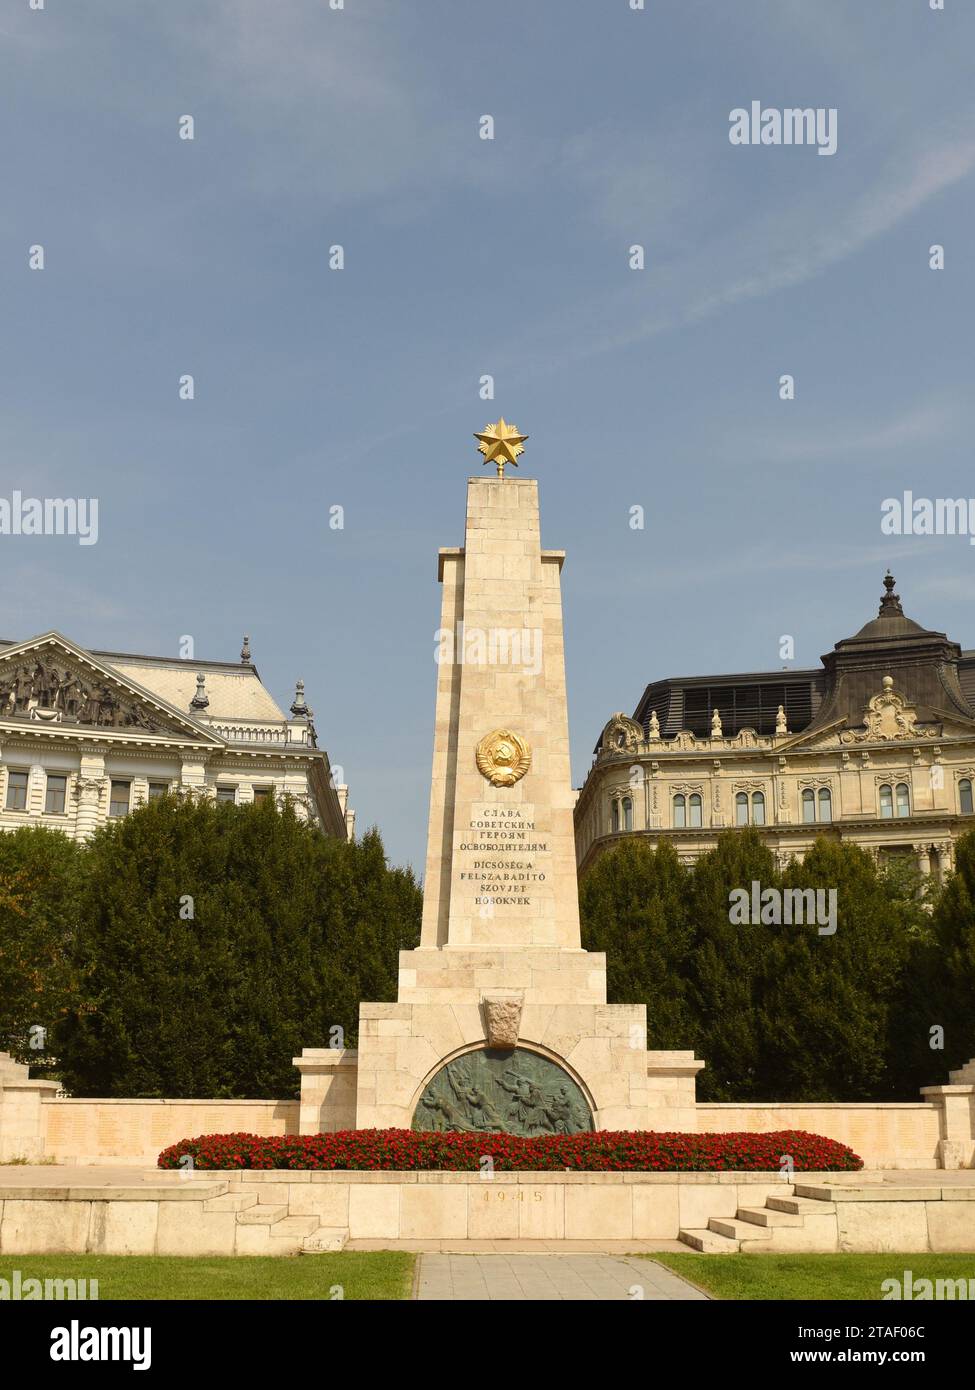 Budapest, Hungary - August 30, 2018: Soviet War Memorial on Liberty Square in Budapest. Stock Photo